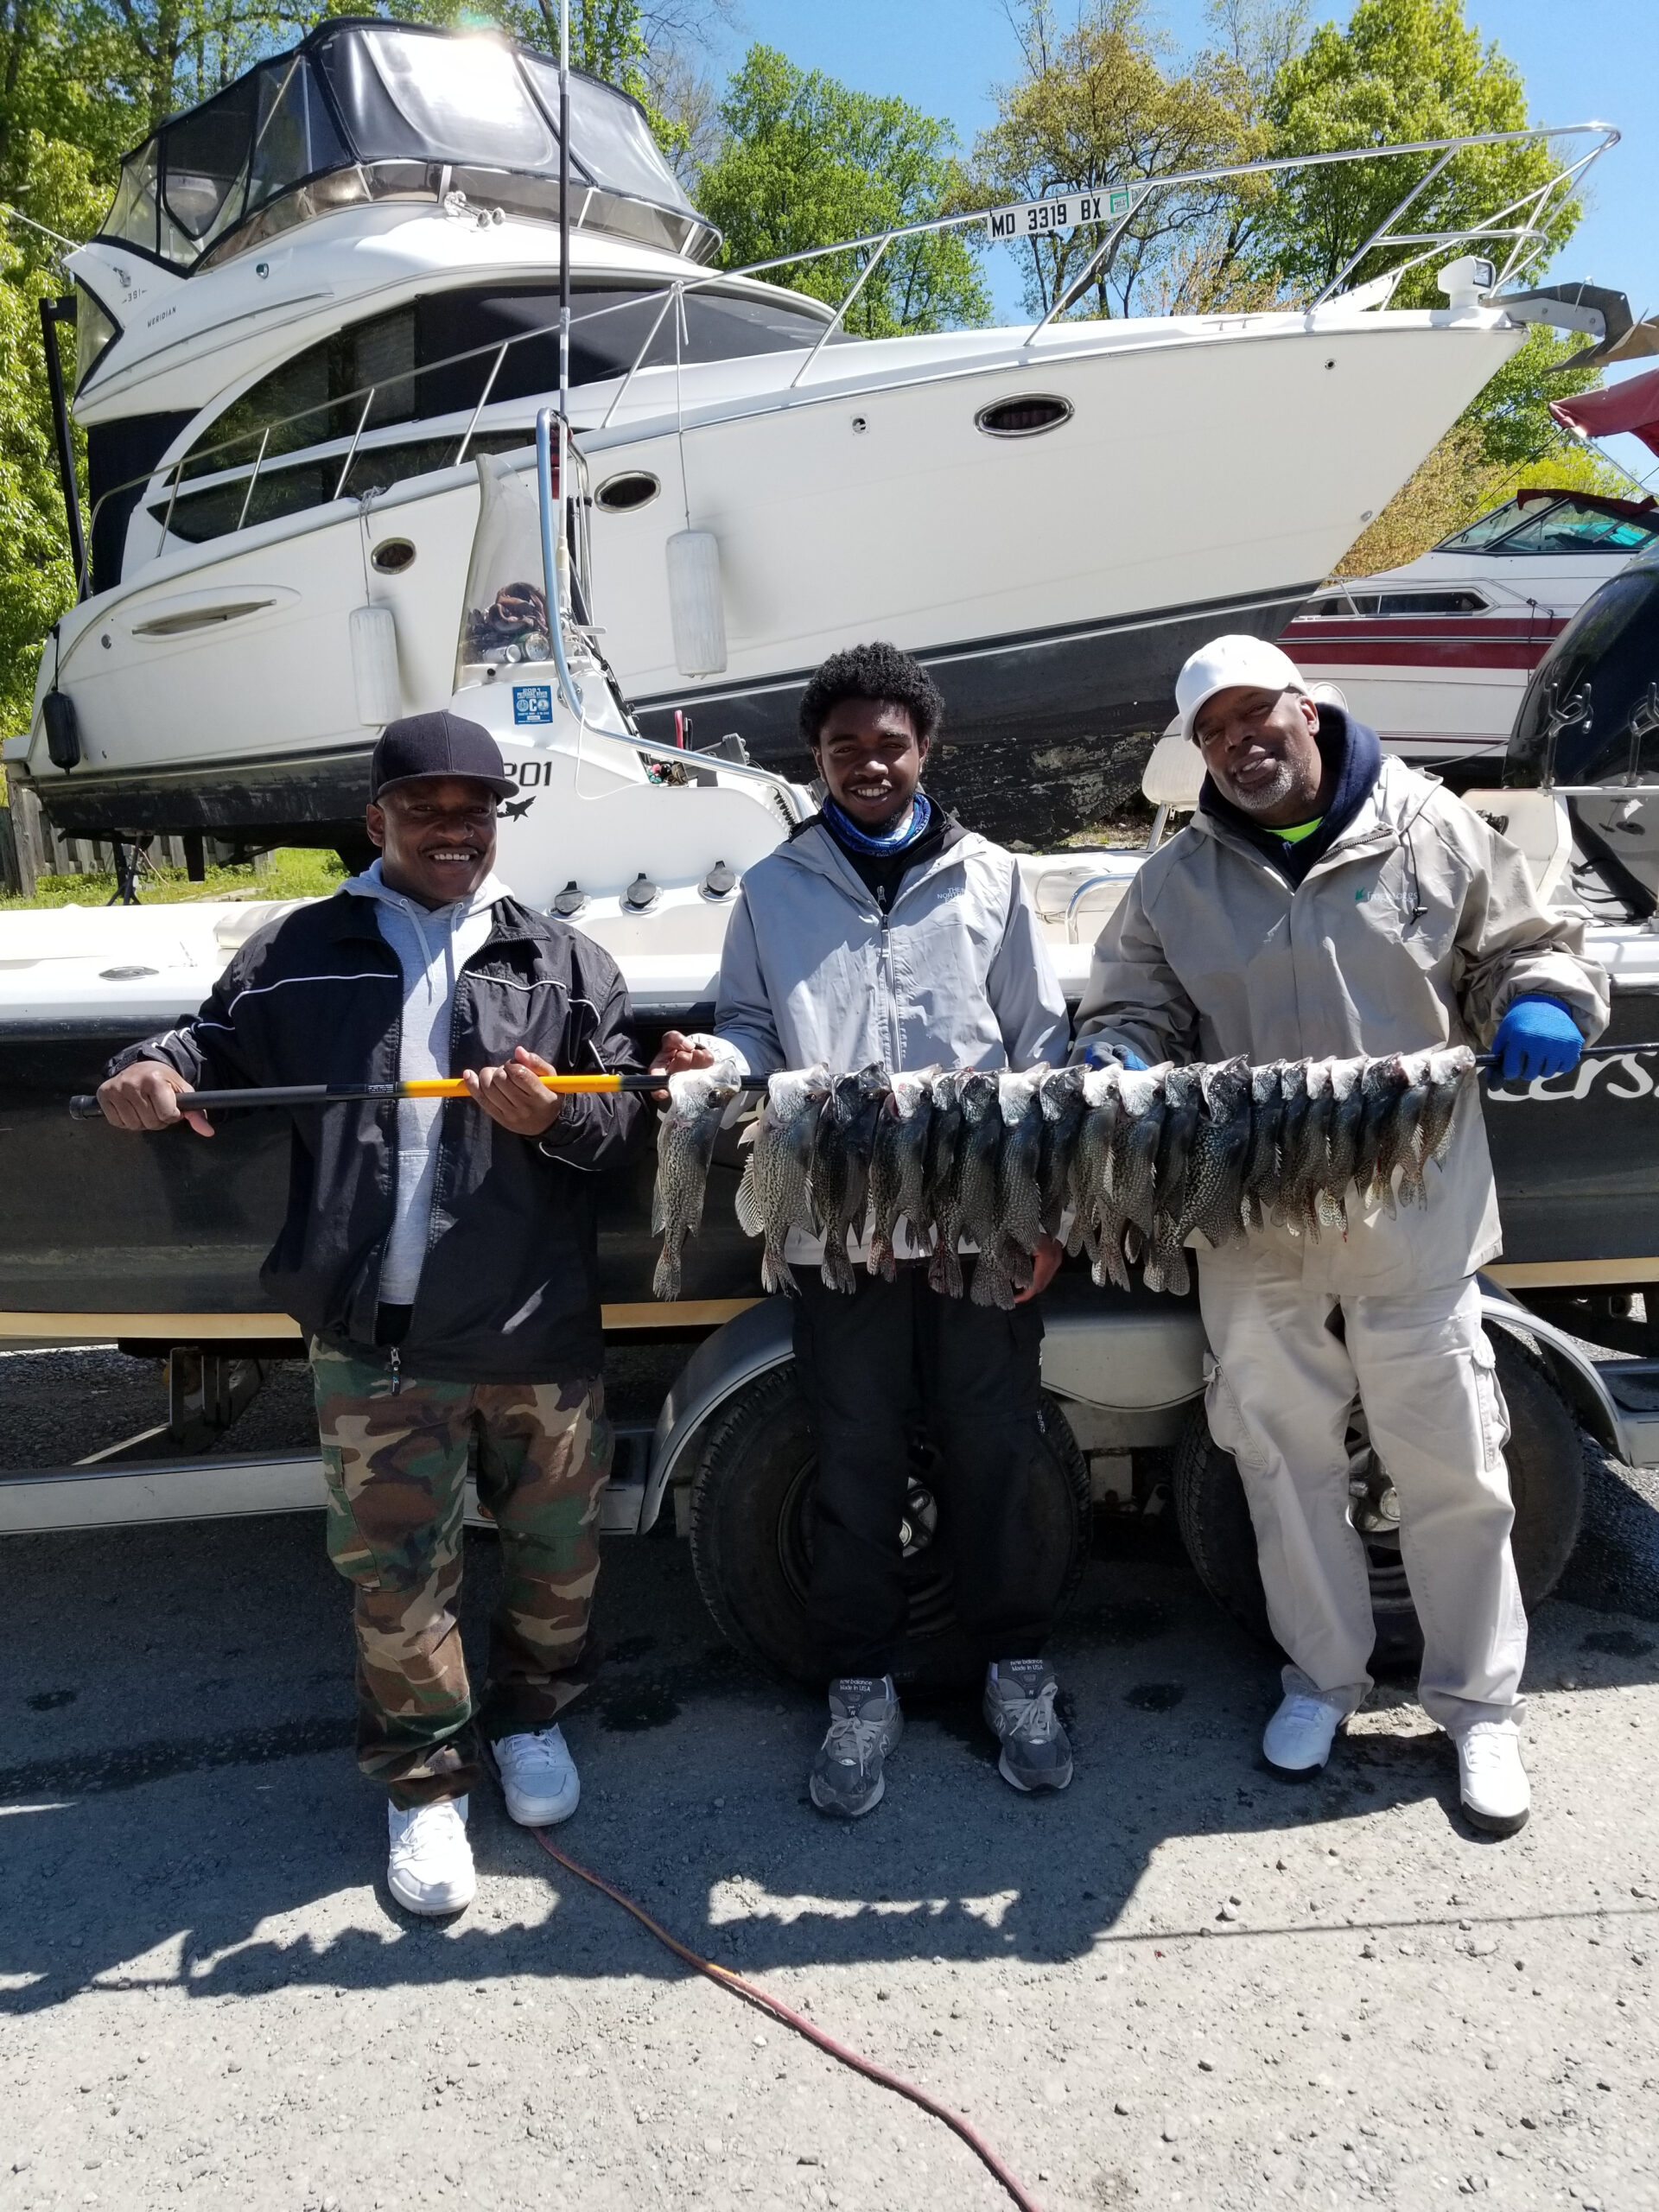 https://indianheadcharters.com/wp-content/uploads/2021/04/41821-scaled.jpg